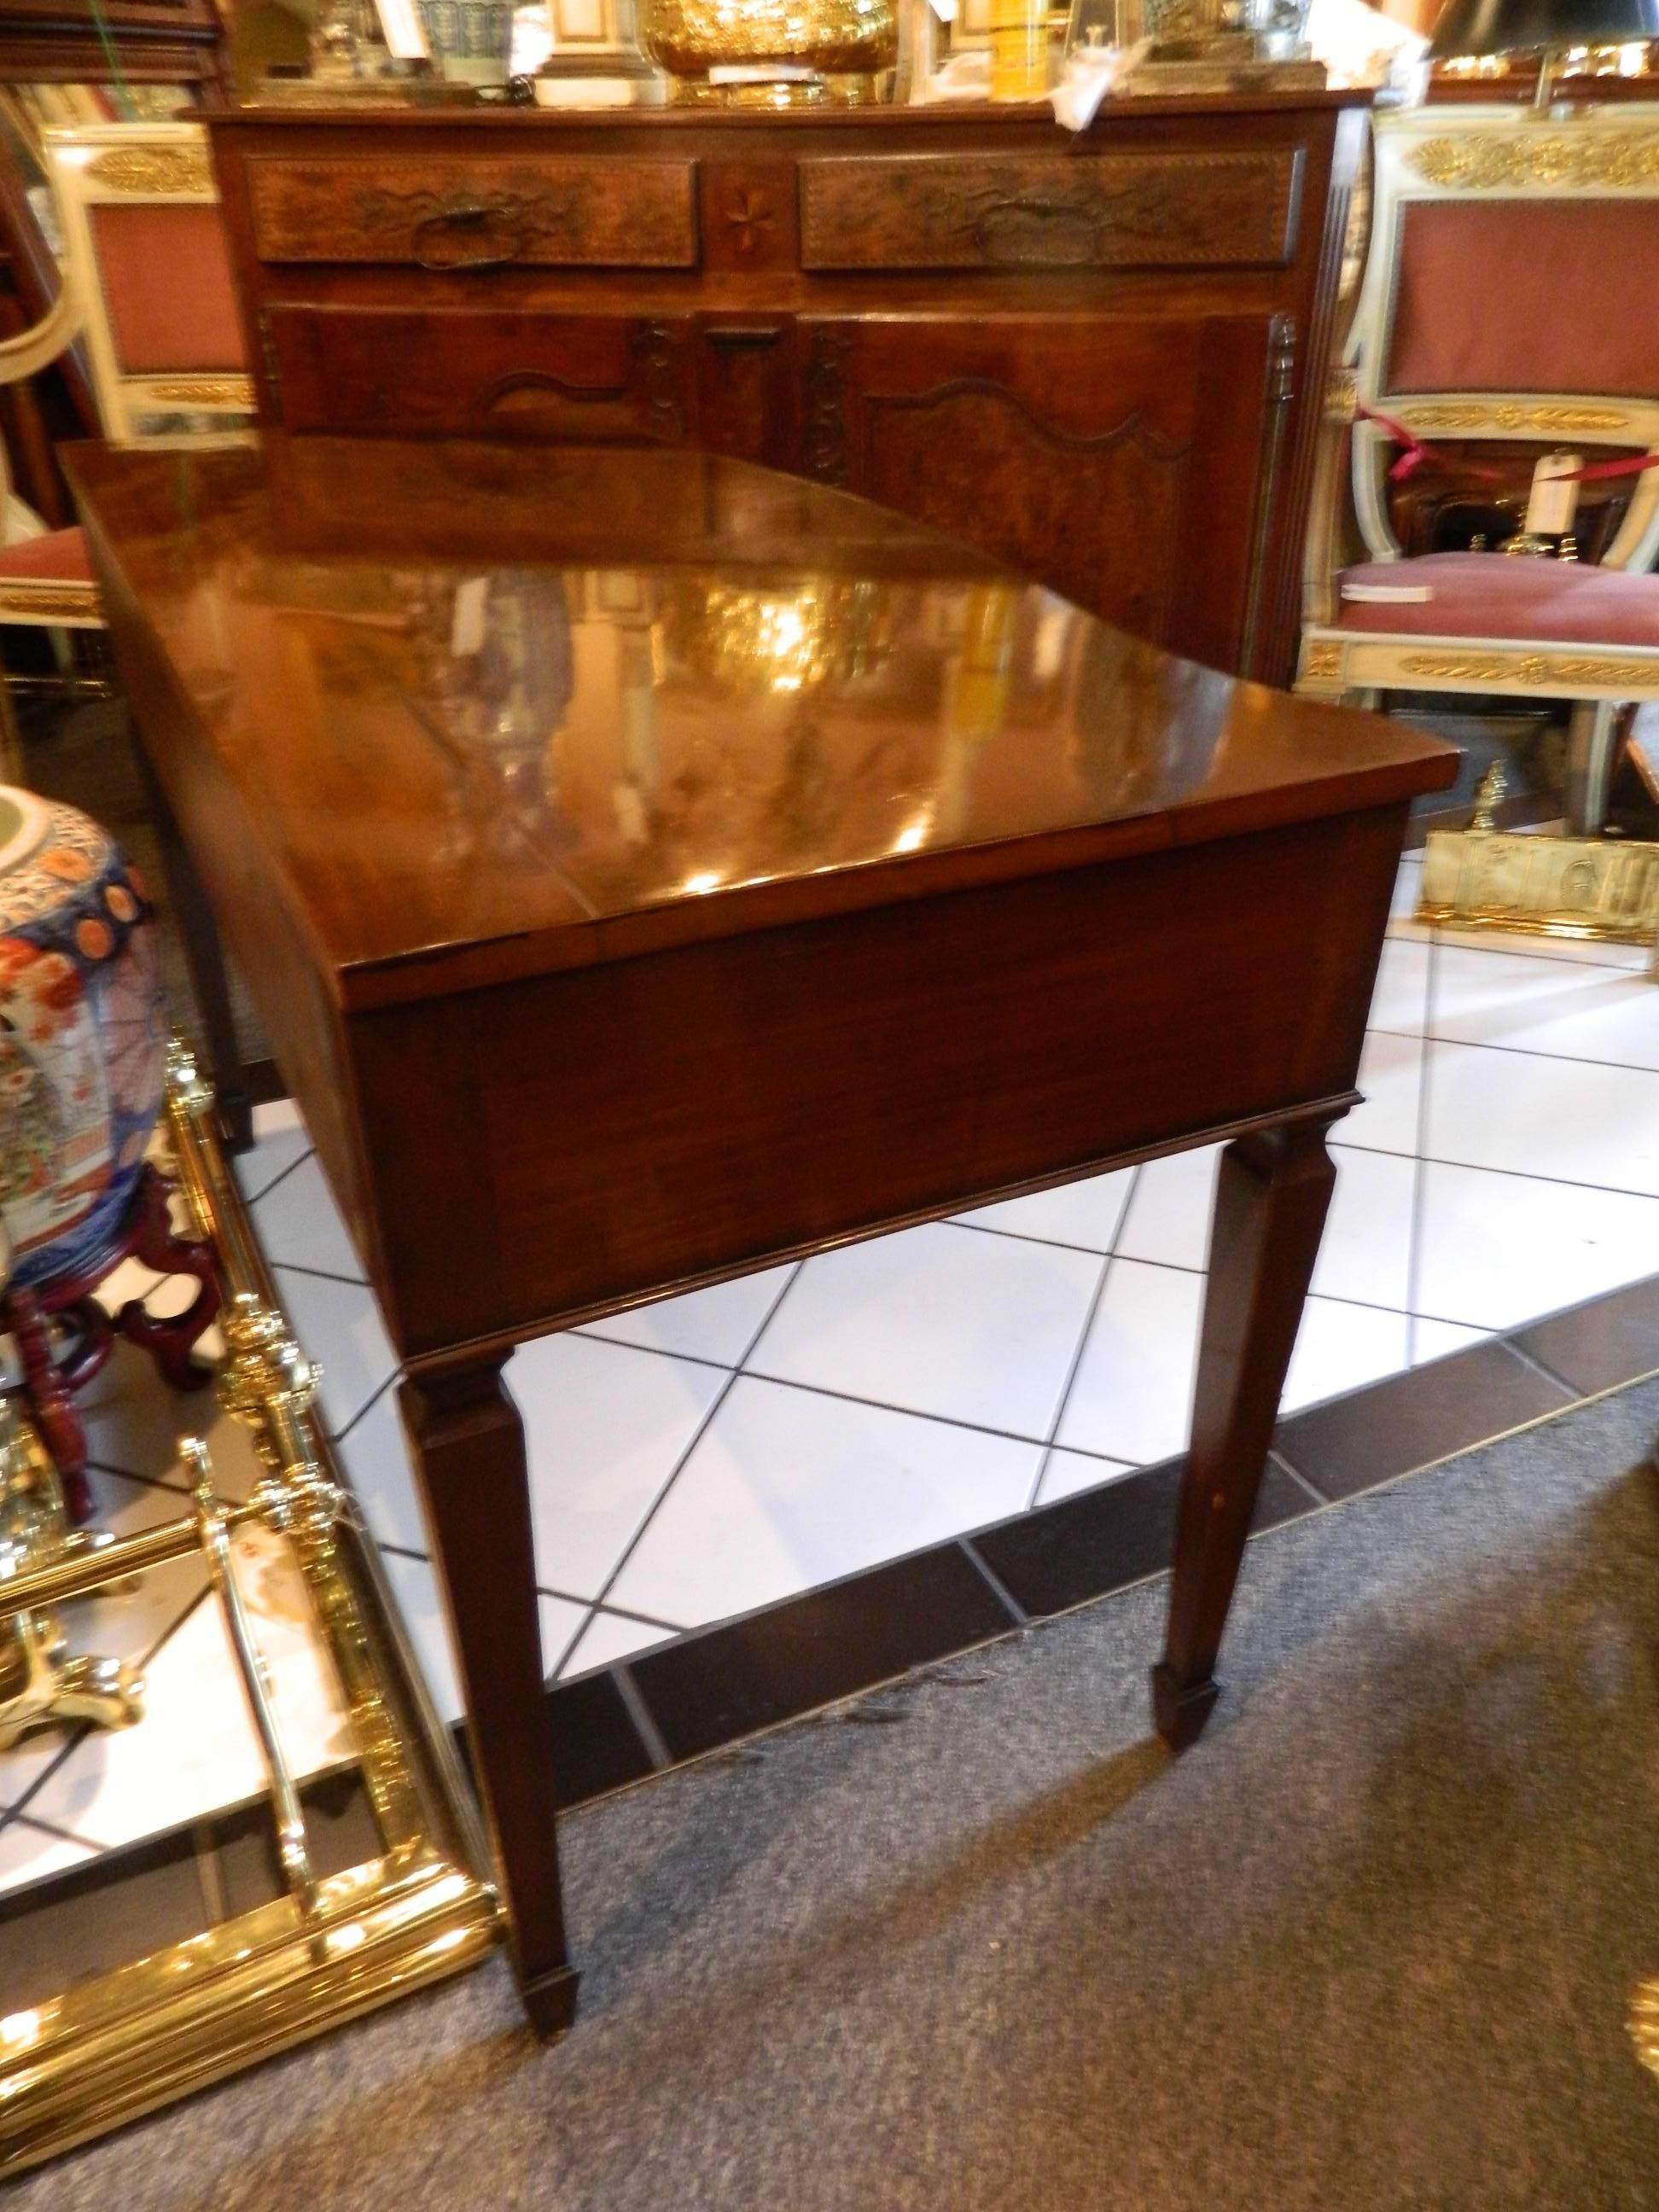 19th century French mahogany desk or Buffet with two pull-out drawers on spaded feet.  Distance from the floor to the bottom of the apron is 23